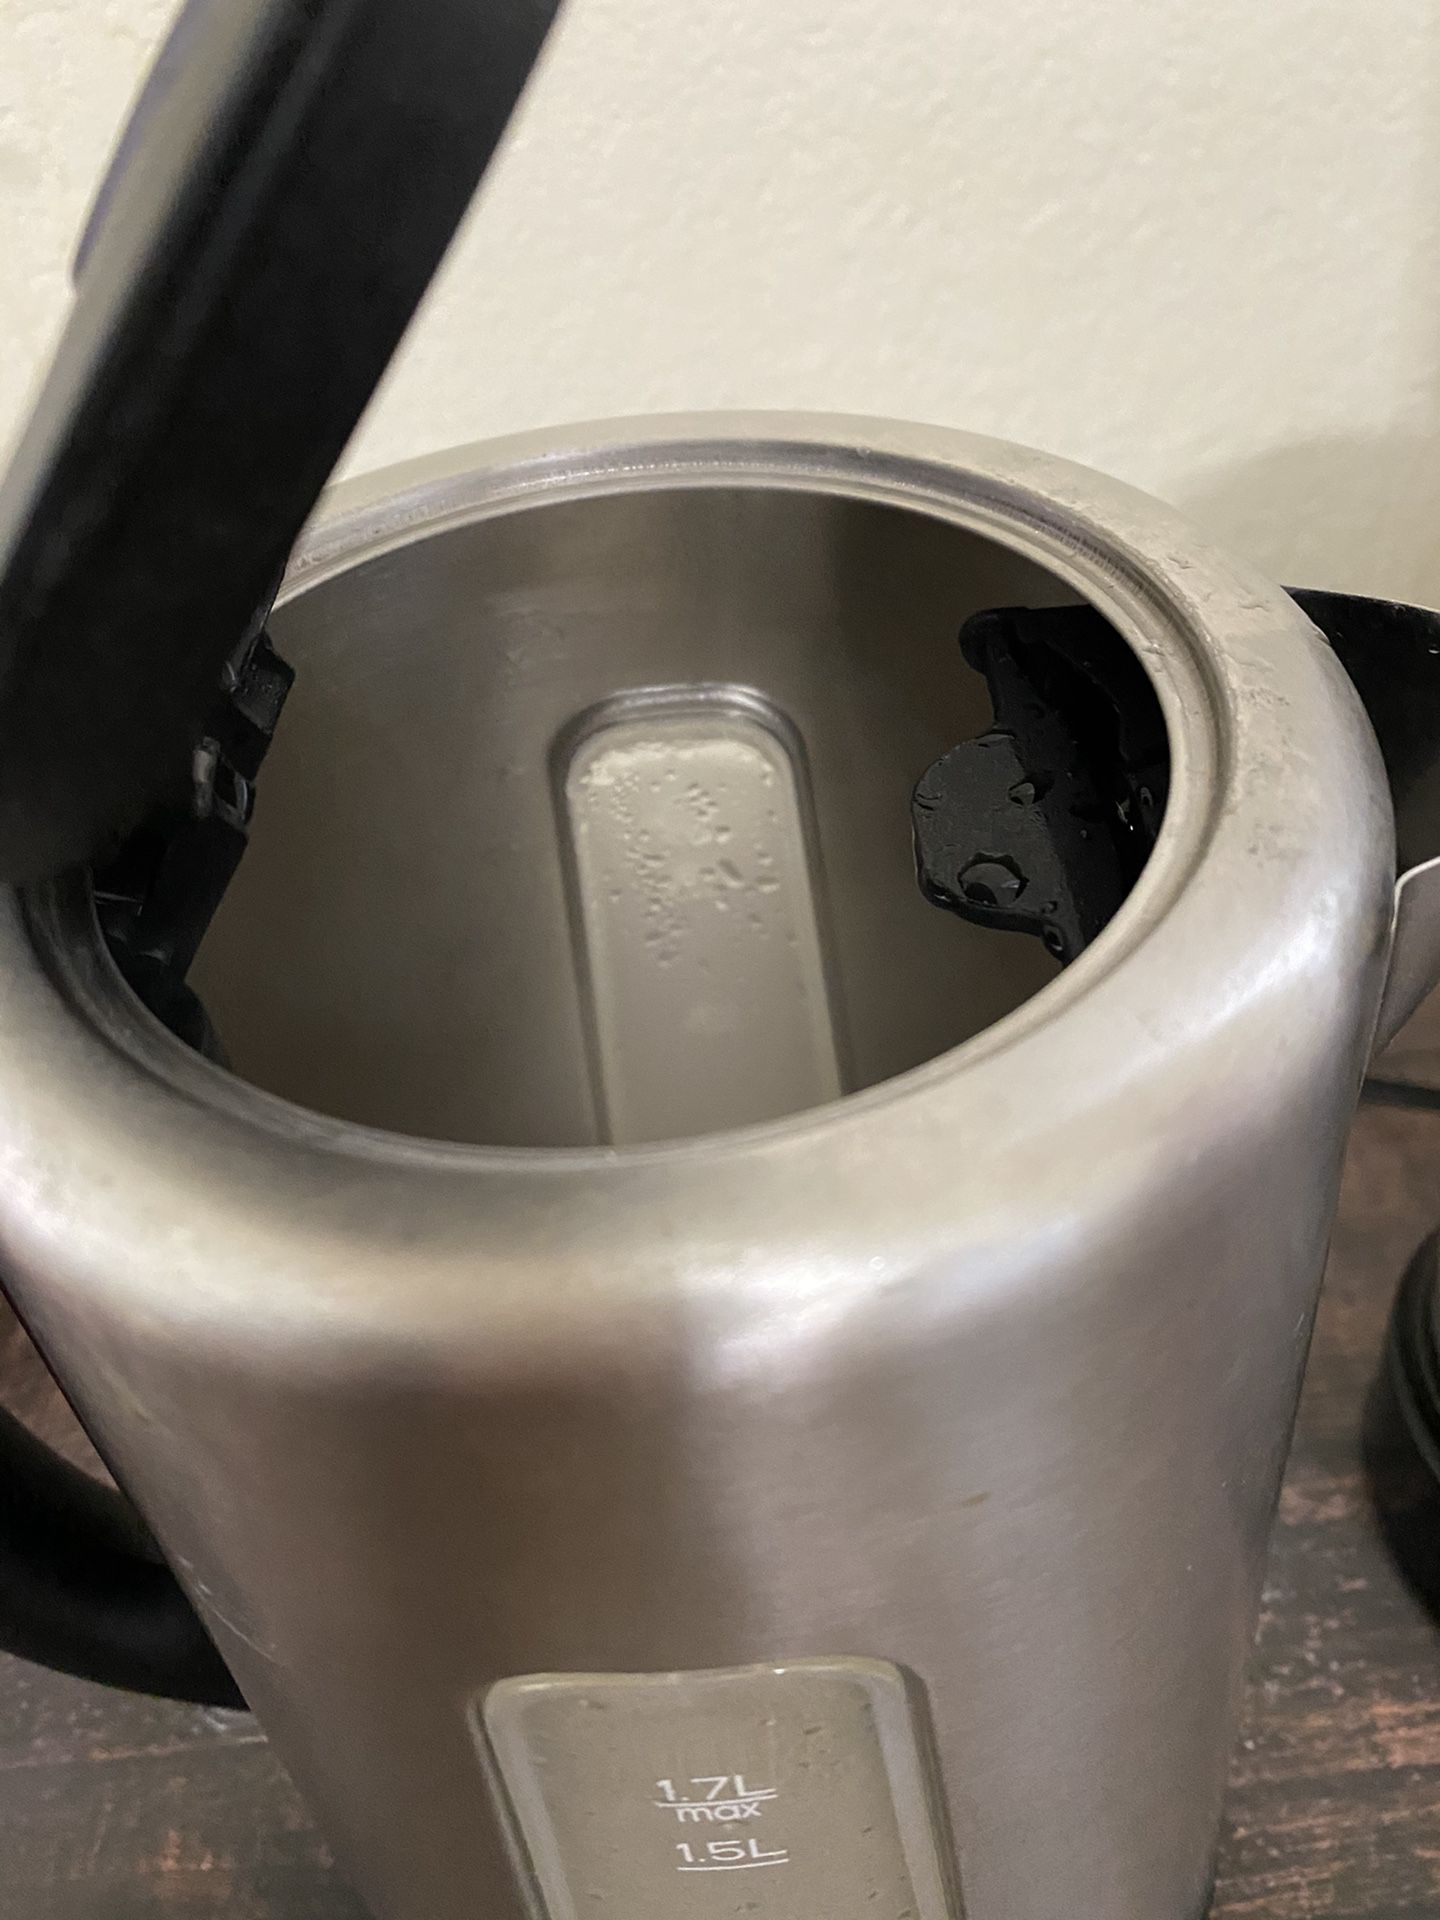 kettle and coffee maker